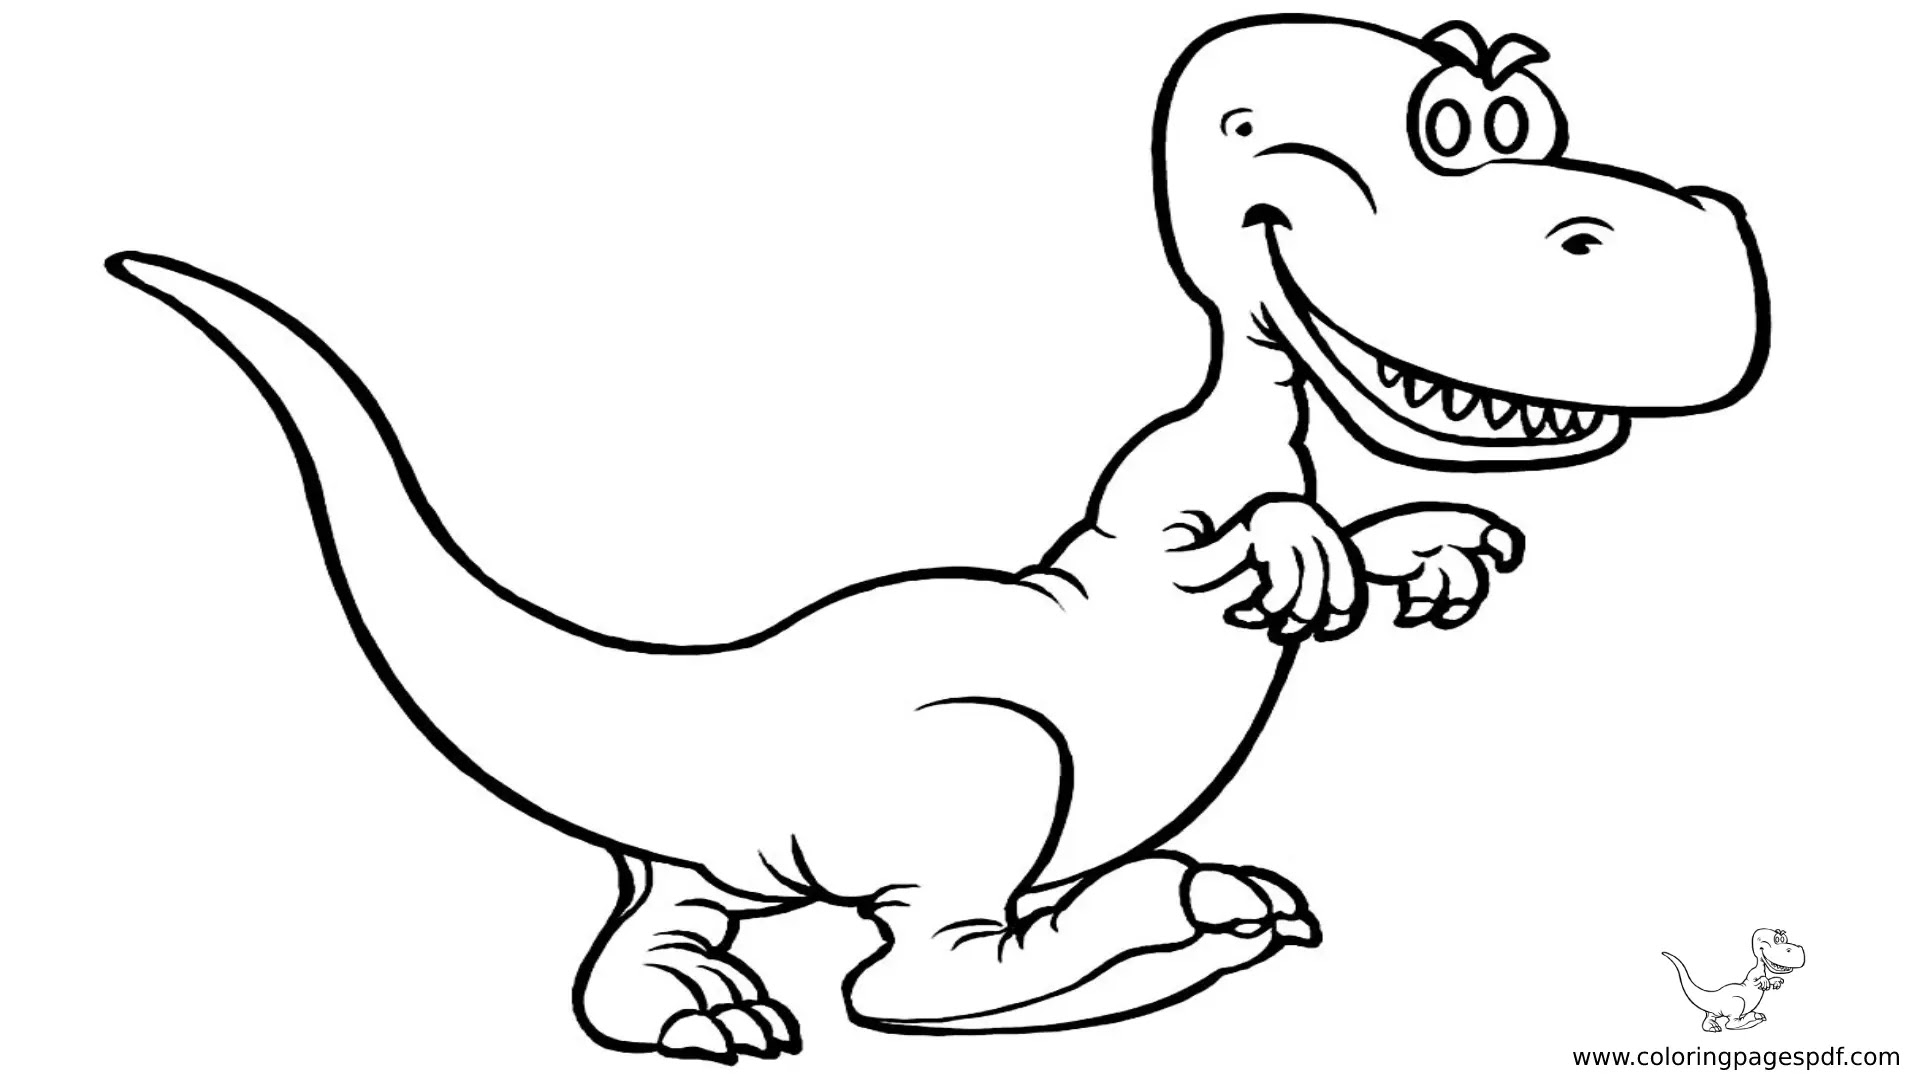 Coloring Pages Of A Cartoon T Rex